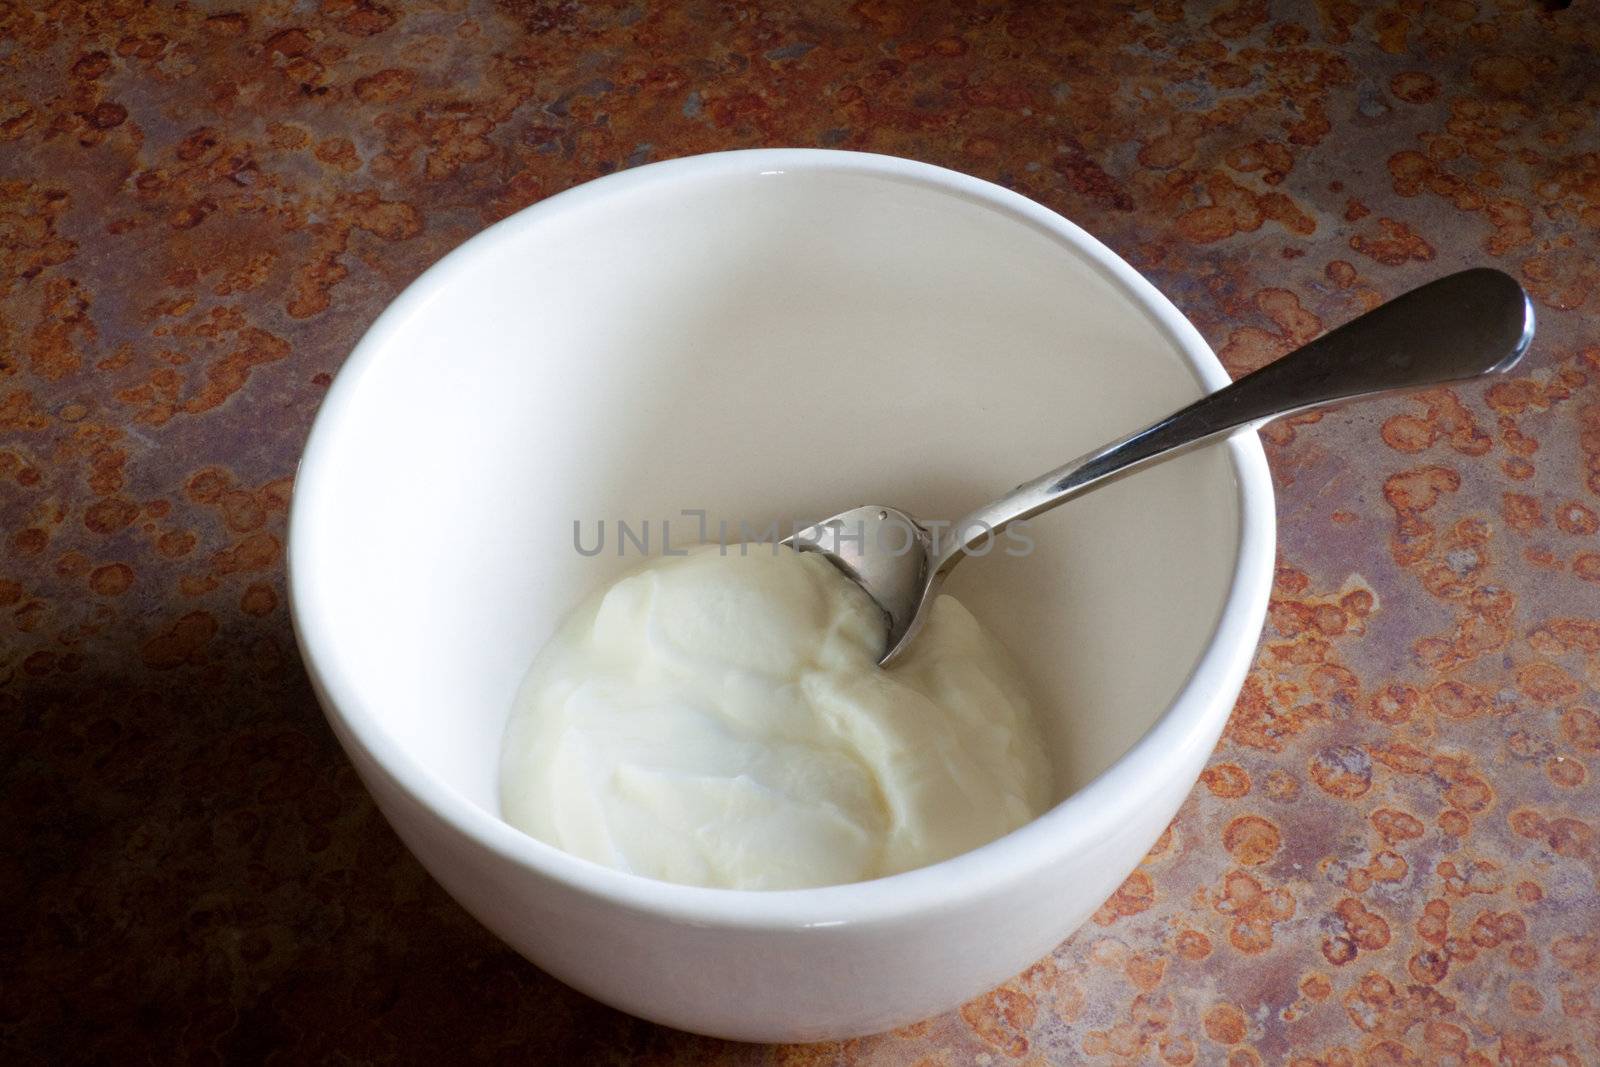 Plain white yogurt sits in a large bowl waiting for toppings to complete this healthy nutritious breakfast meal.